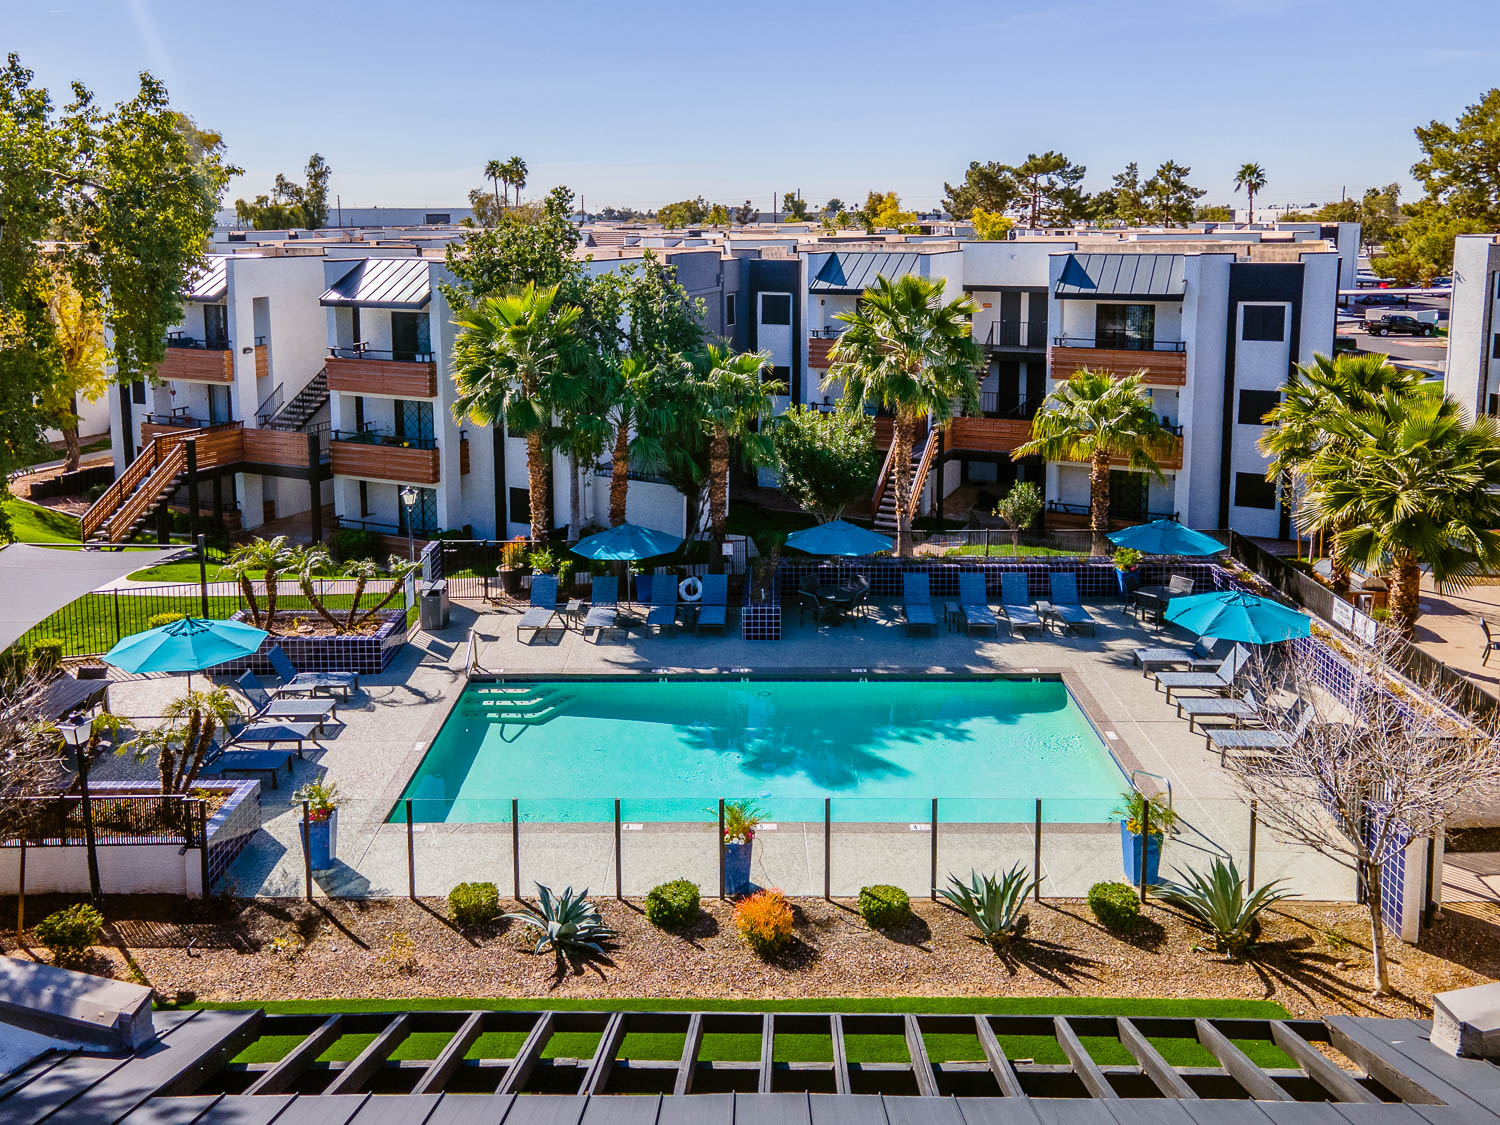 Palm trees surrounding the sparkling swimming pool at Station 21 Apartments in Mesa, Arizona